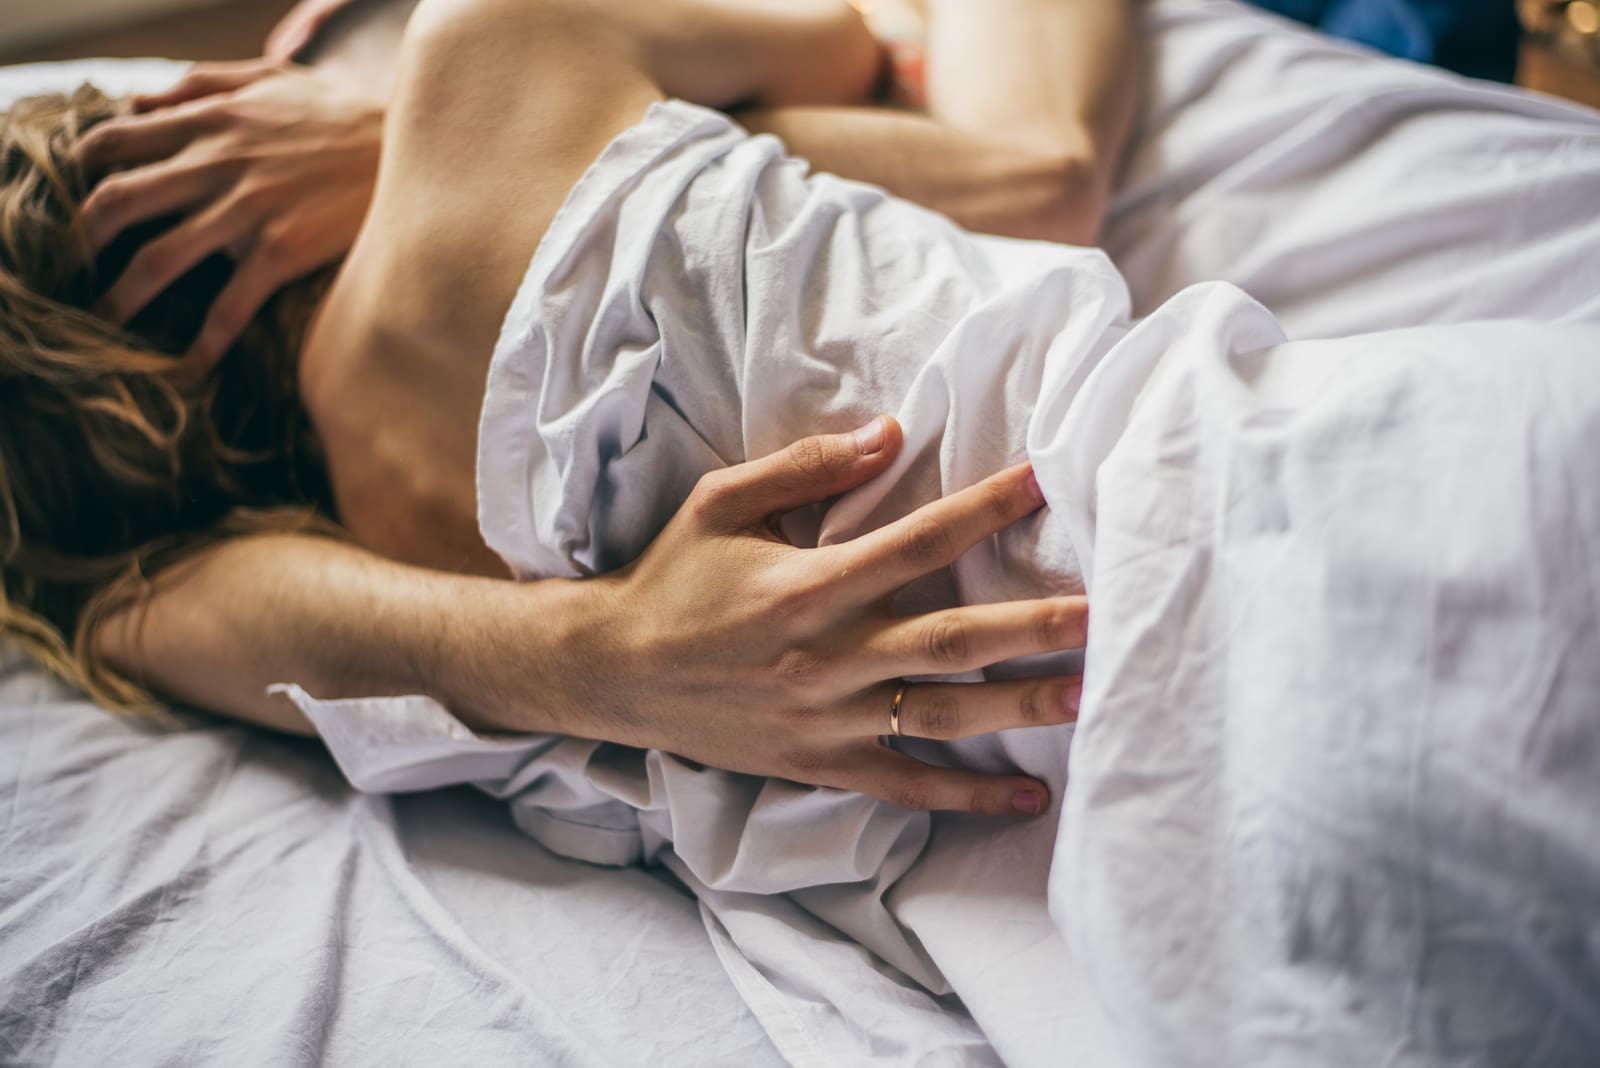 4 Zodiac Signs That Have To Have Sex All The Time